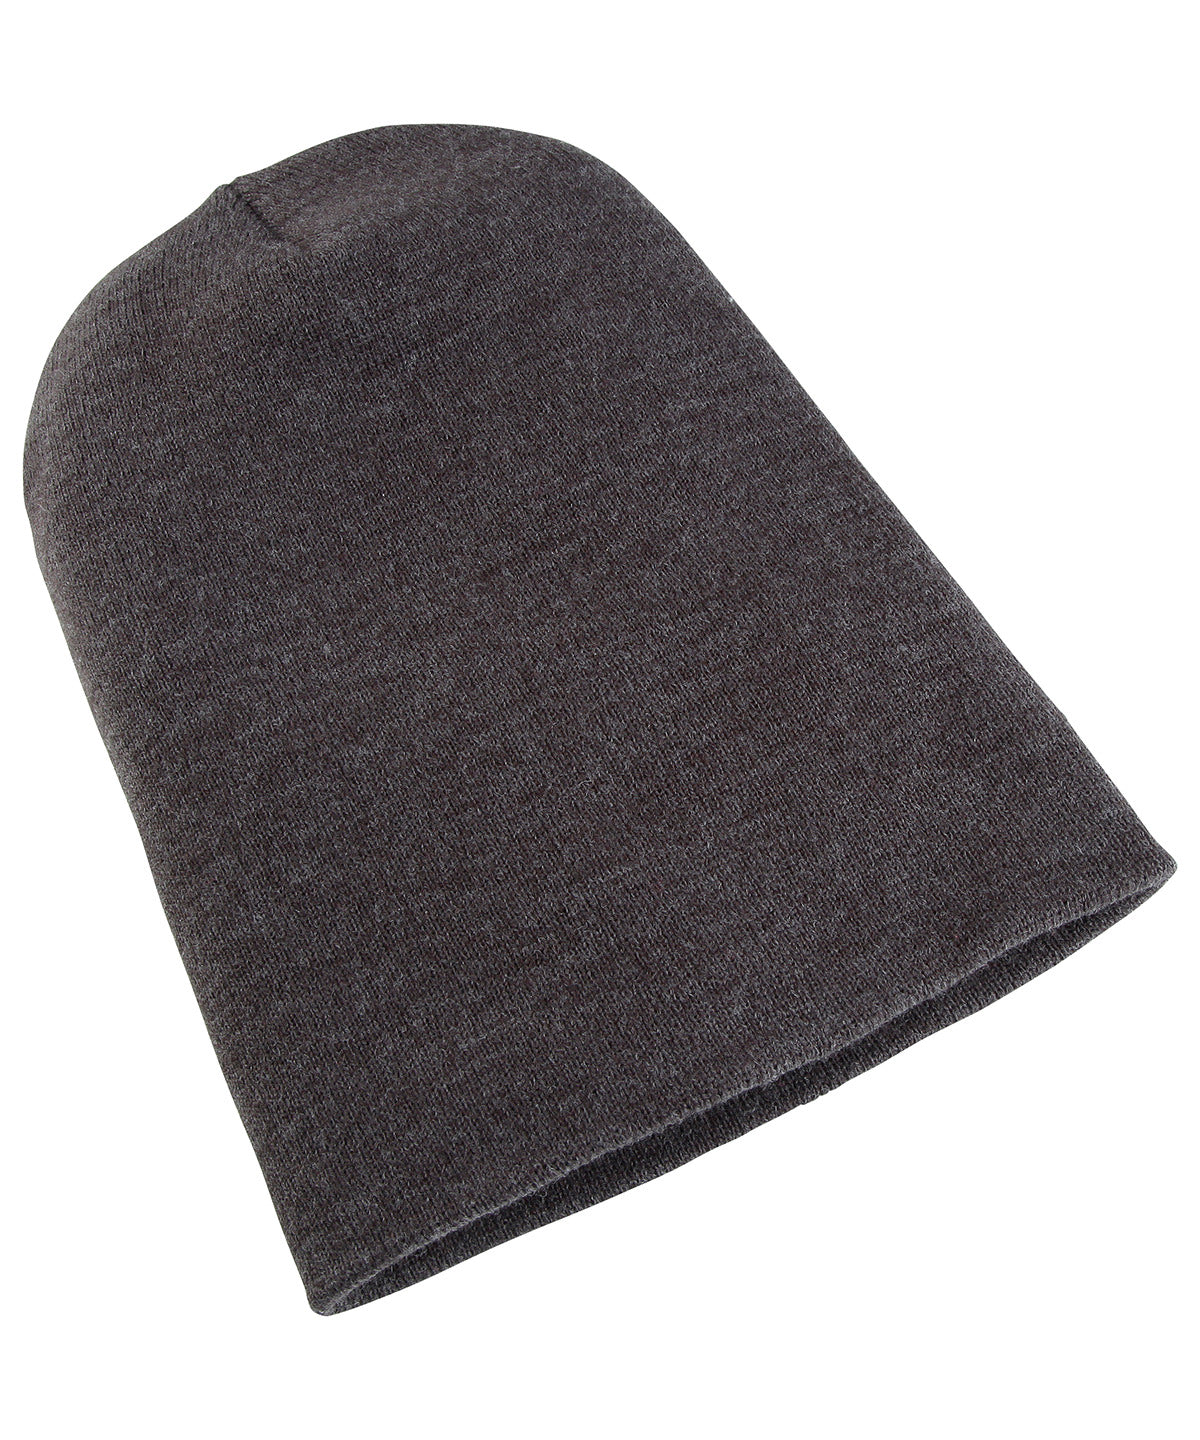 Charcoal - Heavyweight long beanie (1501KC) Hats Flexfit by Yupoong Headwear, Must Haves, New Colours for 2023, Winter Essentials Schoolwear Centres